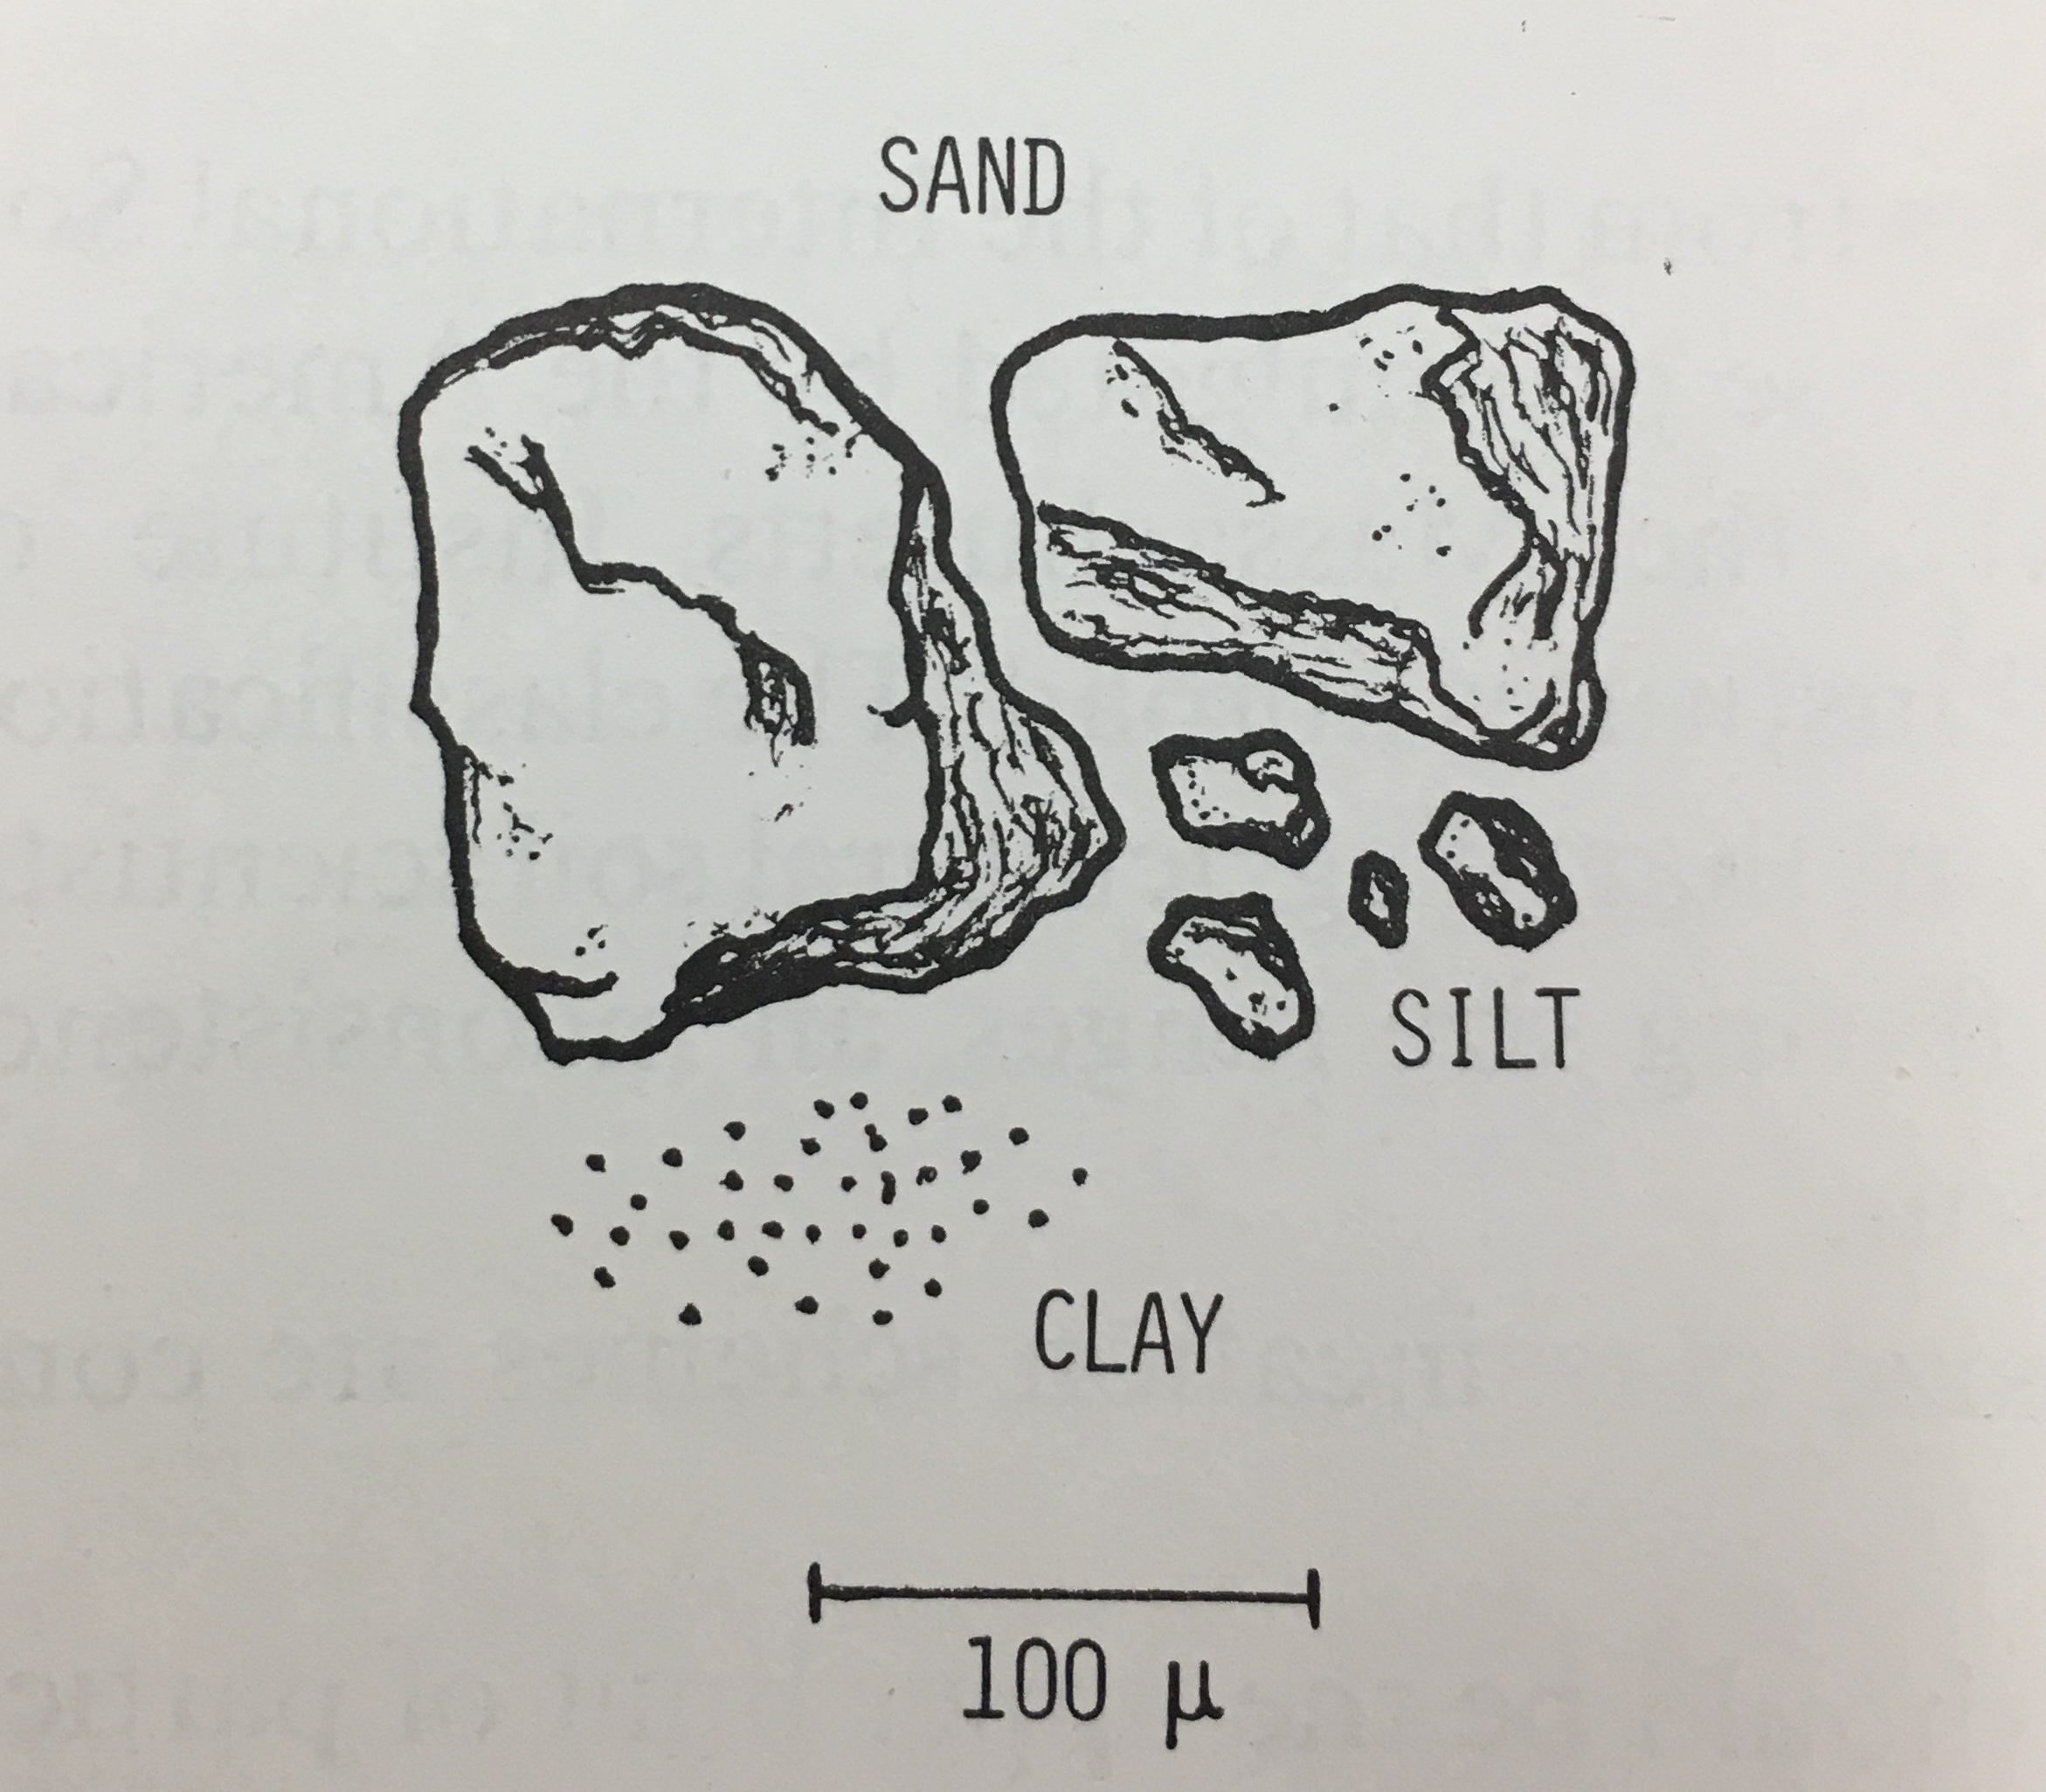 Figure 2. Visual comparison of the size and shapes of each separate. Refer to the text written by Hillel for the original image.